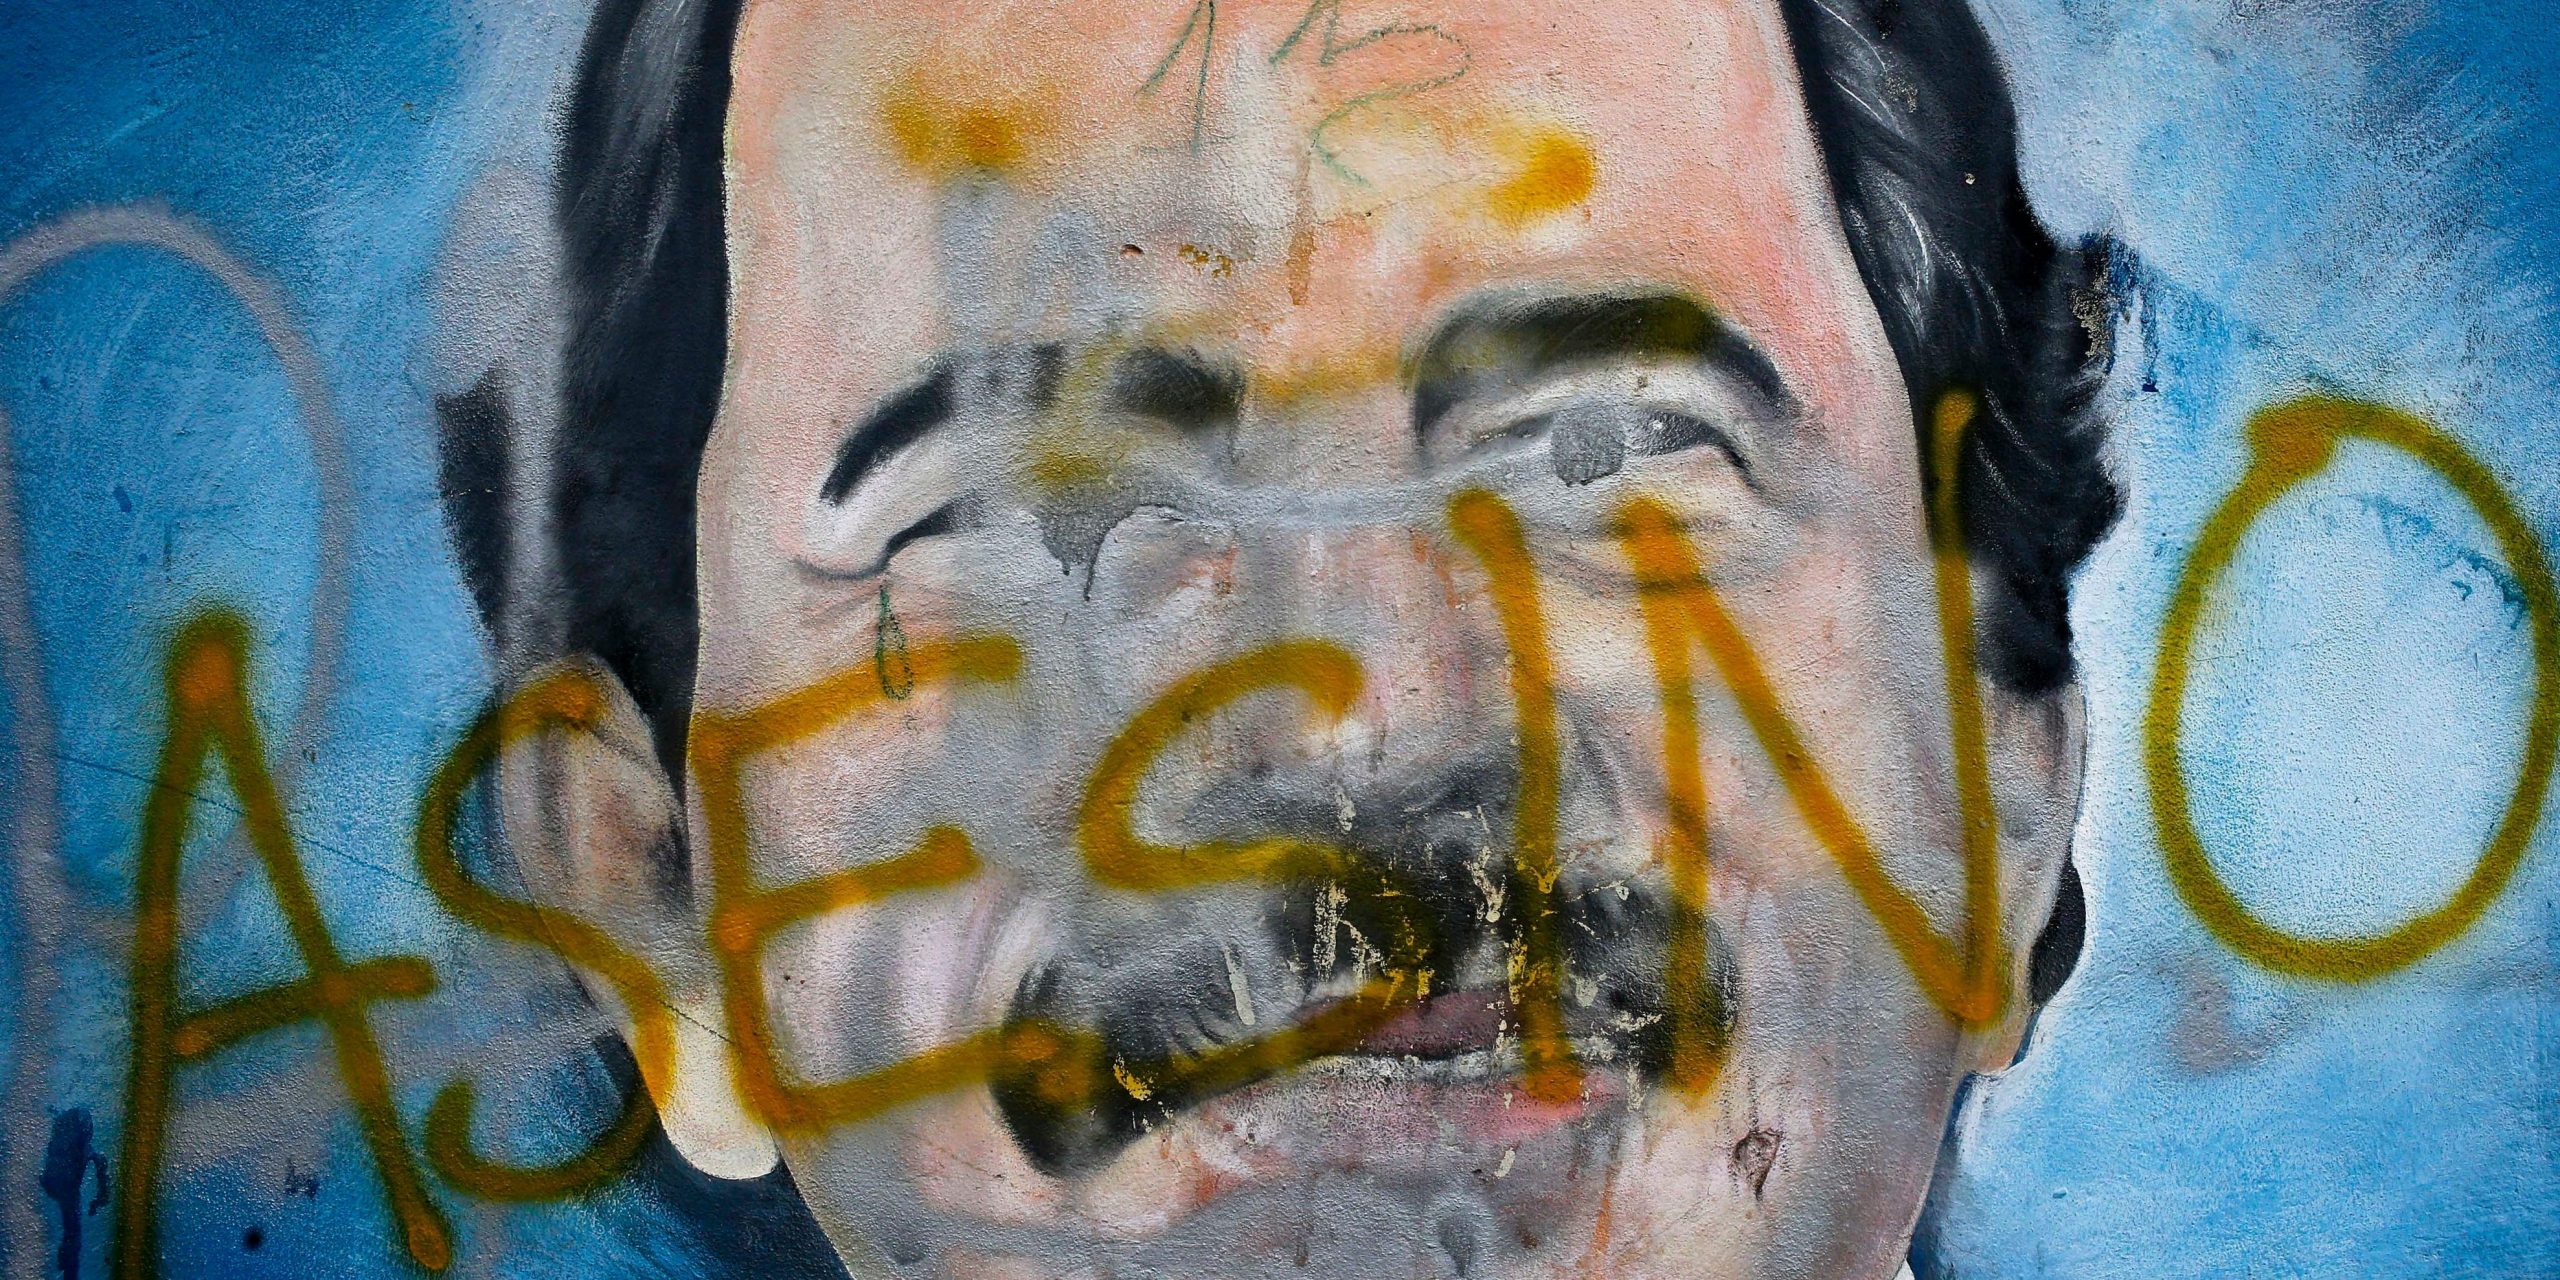 A portrait of Nicaraguan president Daniel Ortega with the word "asesino" written on top.